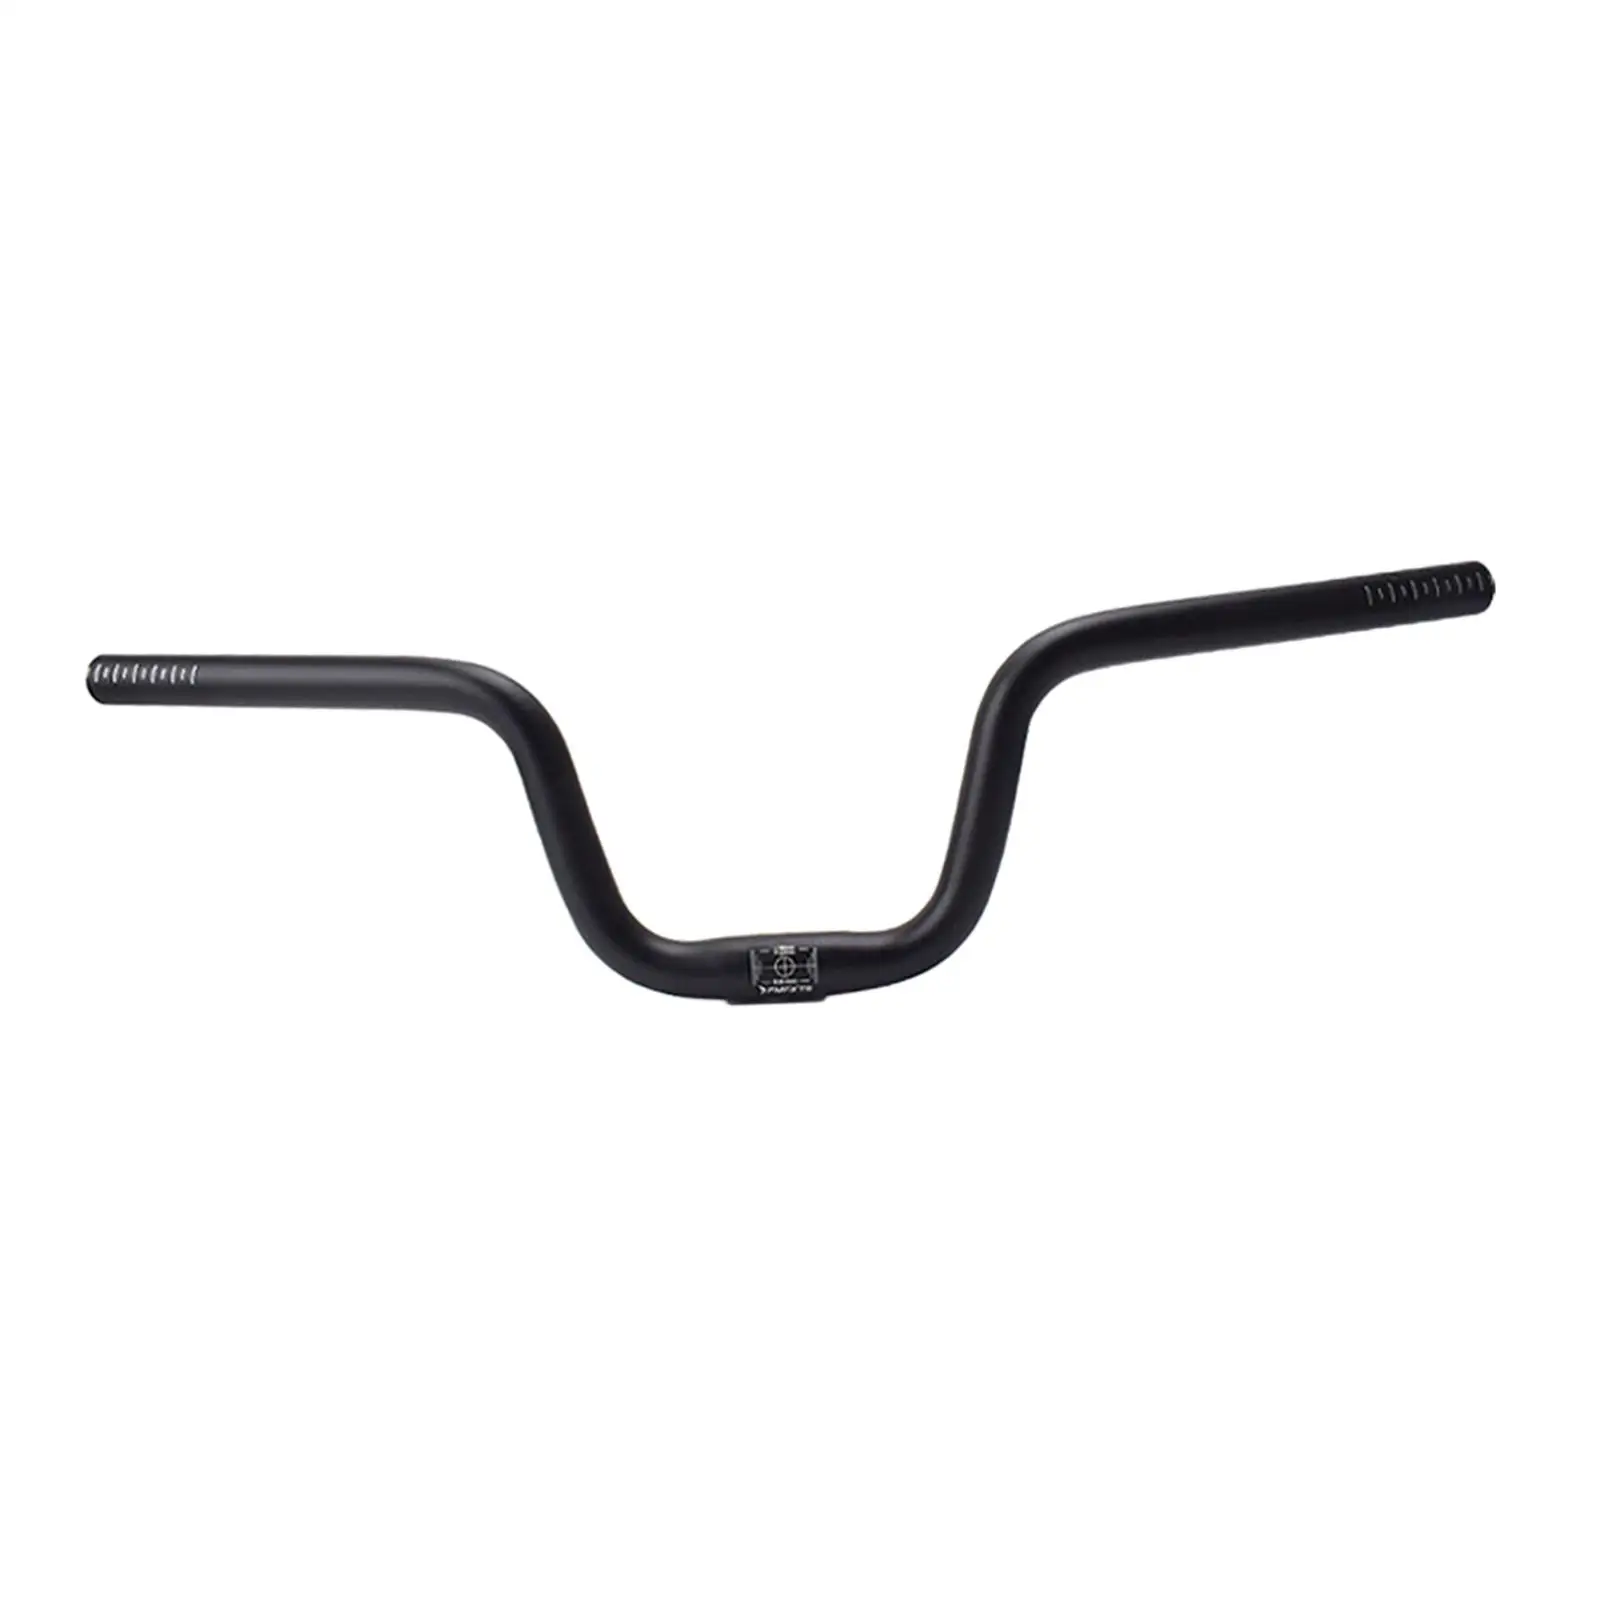 Folding Bike Handlebar Cycling Handle 1 inch Clamp 22.2mm Accessories Riser Bars for Road Bike BMX Outdoor Activities Riding